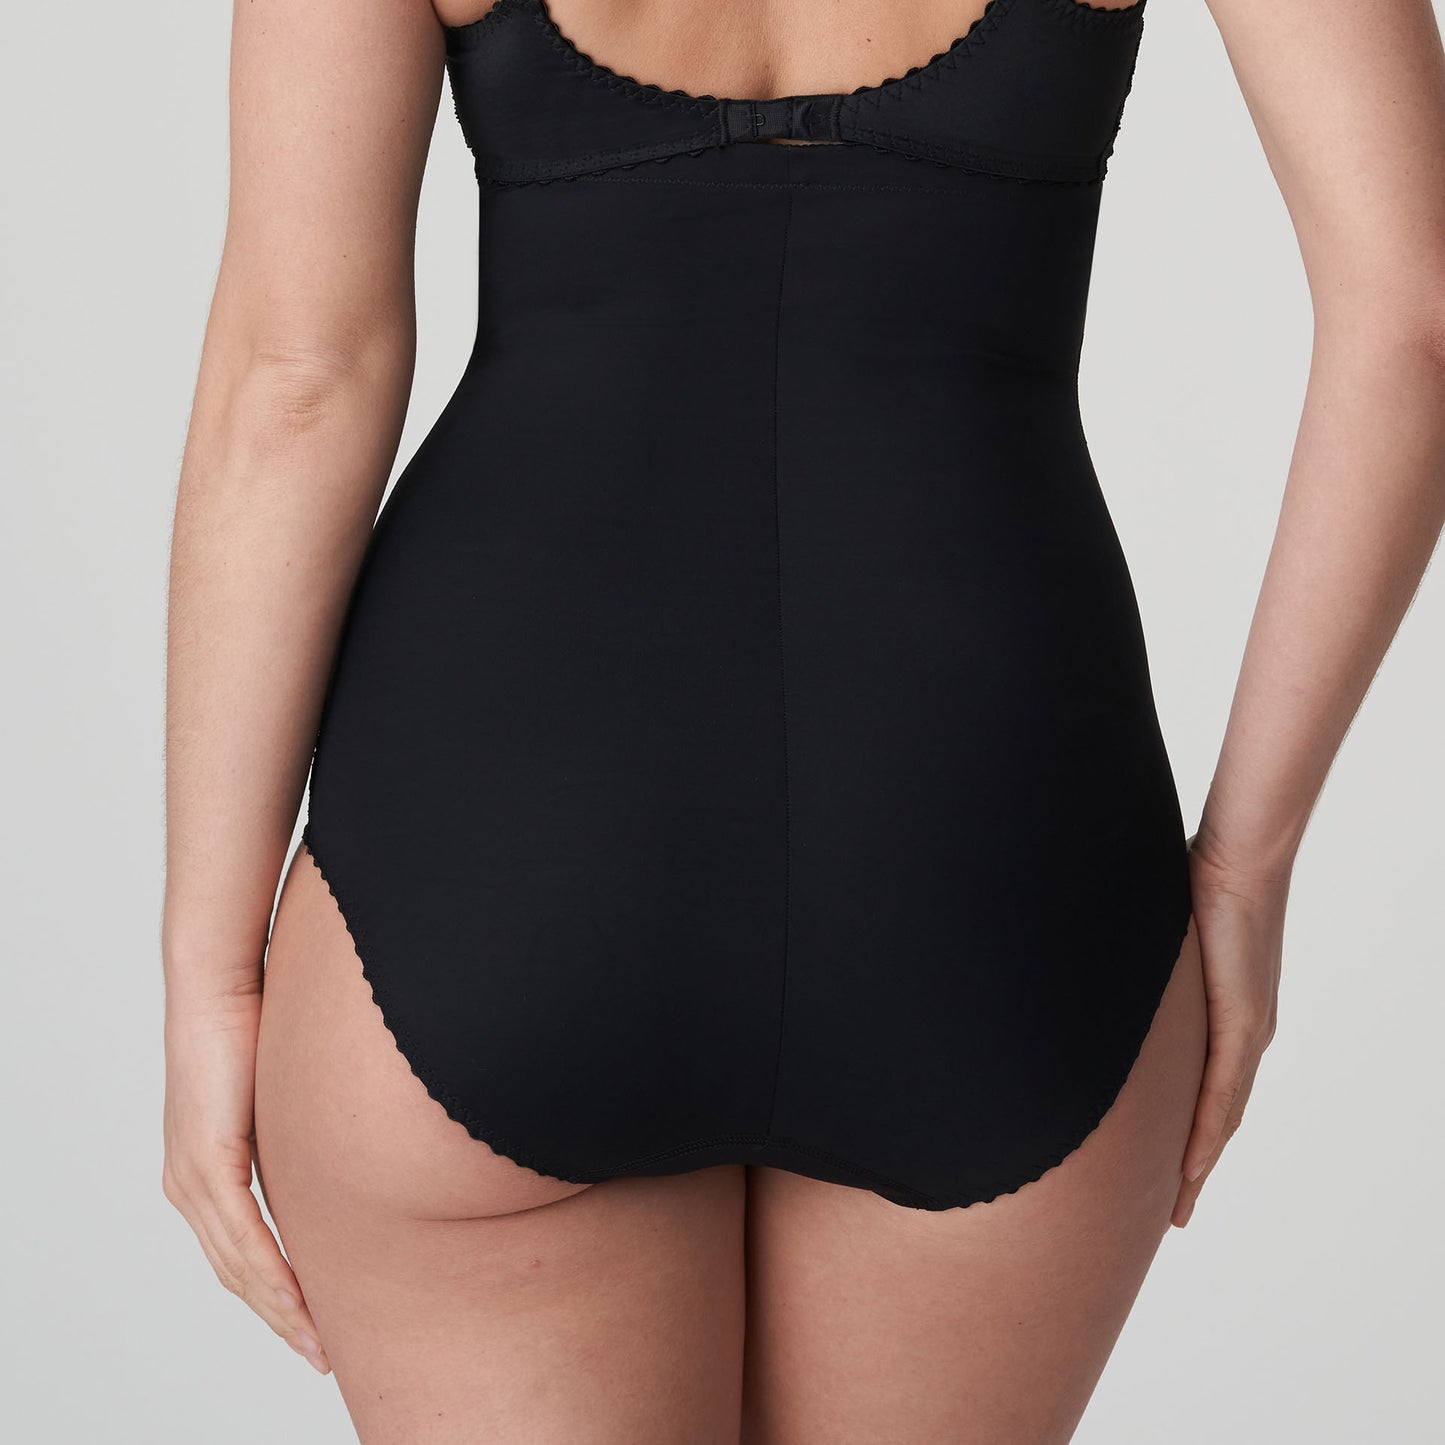 PrimaDonna COUTURE black shapewear dress with briefs